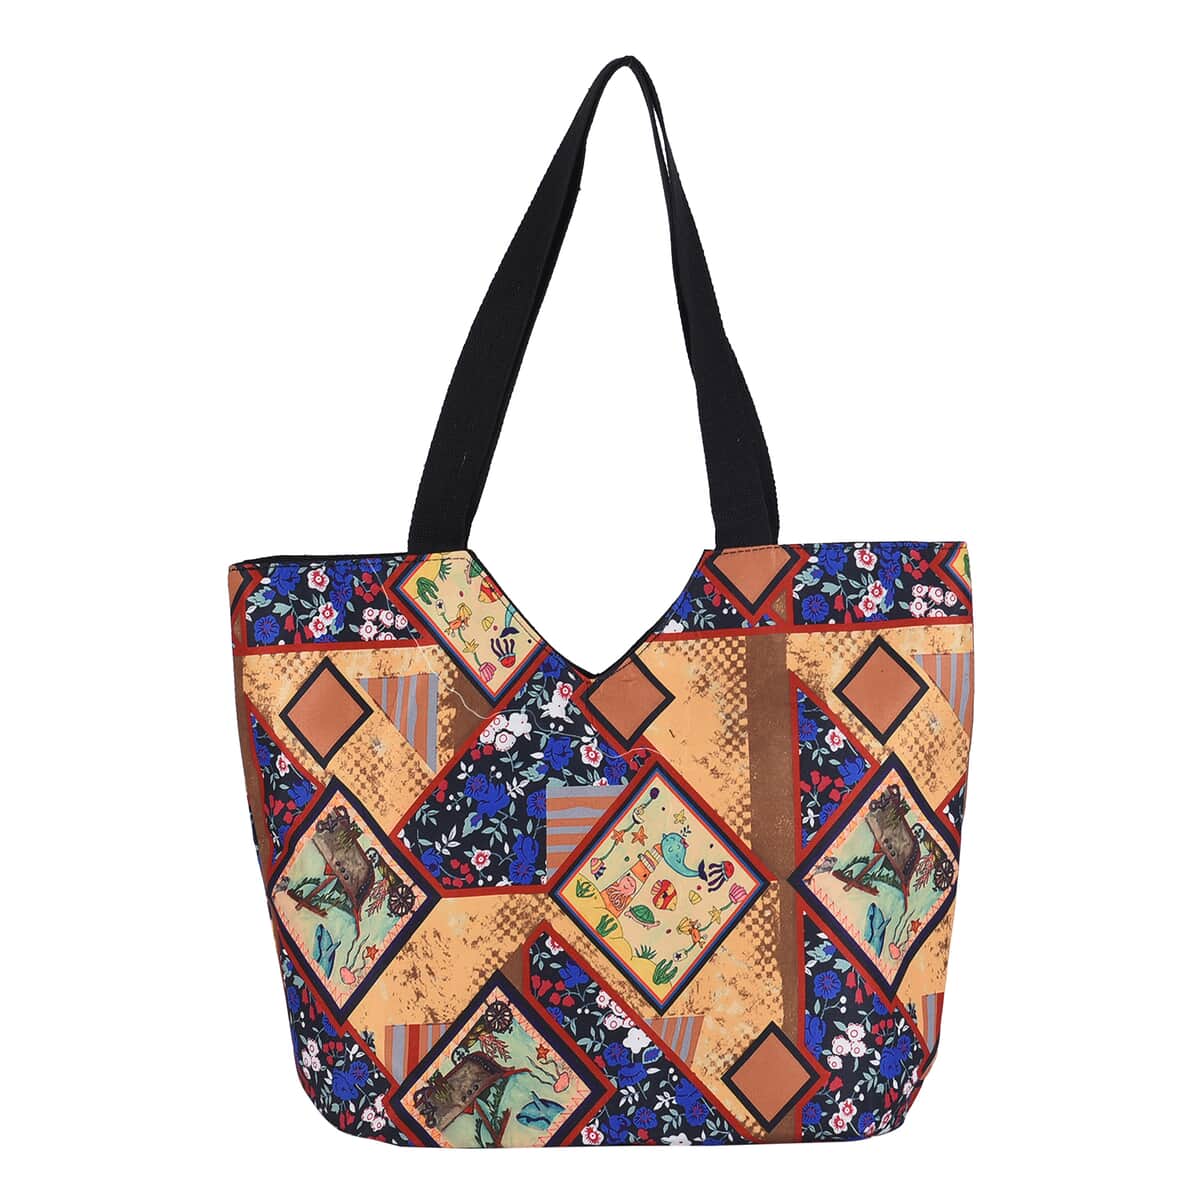 Yellow Patchwork Printed Pattern Tote Bag (17.5"x6"x13.5") with Handle Drop image number 0